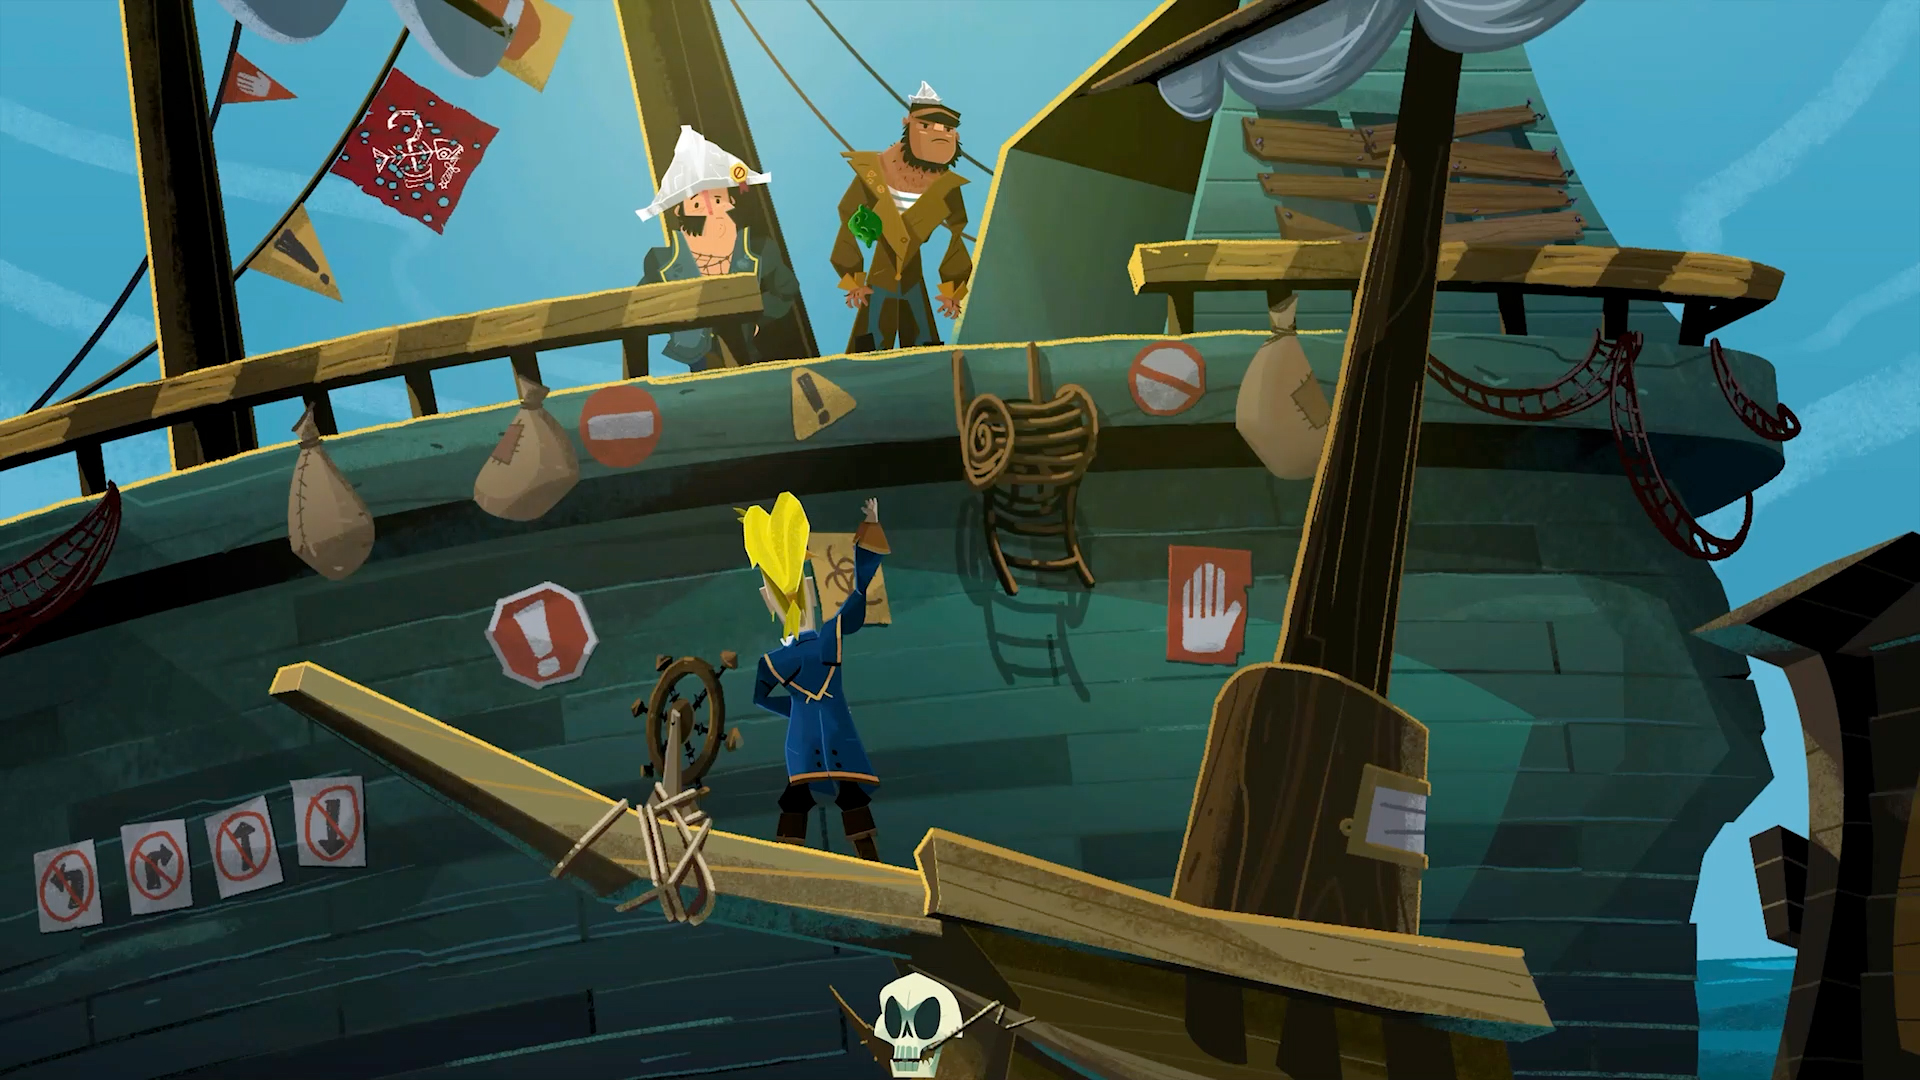 A screenshot from Return to Monkey Island. Two pirates stand on a ship, while another waves from below.